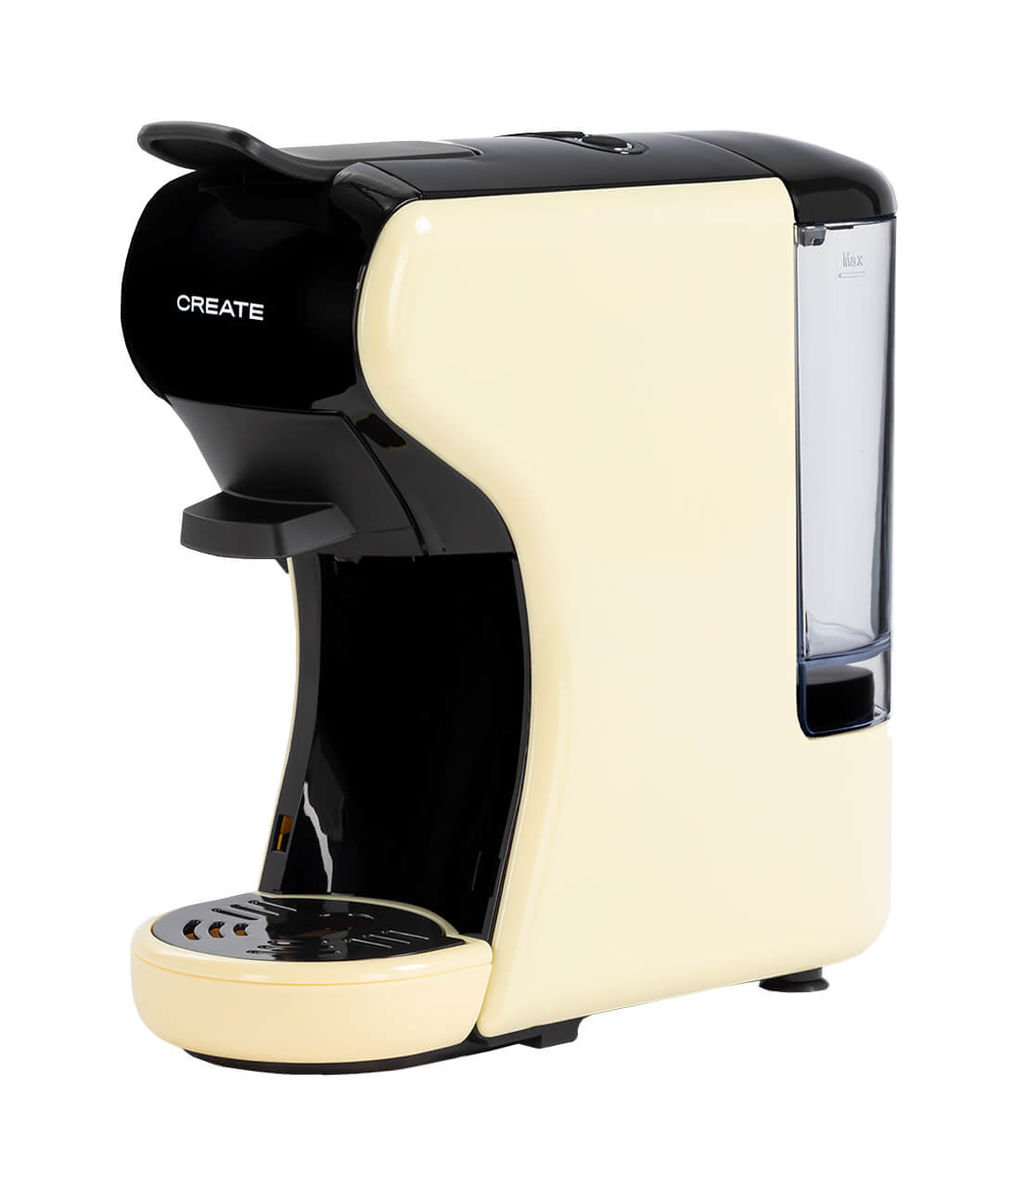 Image of CREATE Cafetera Potts Kapselsystem Vanille 3in1 bei nettoshop.ch